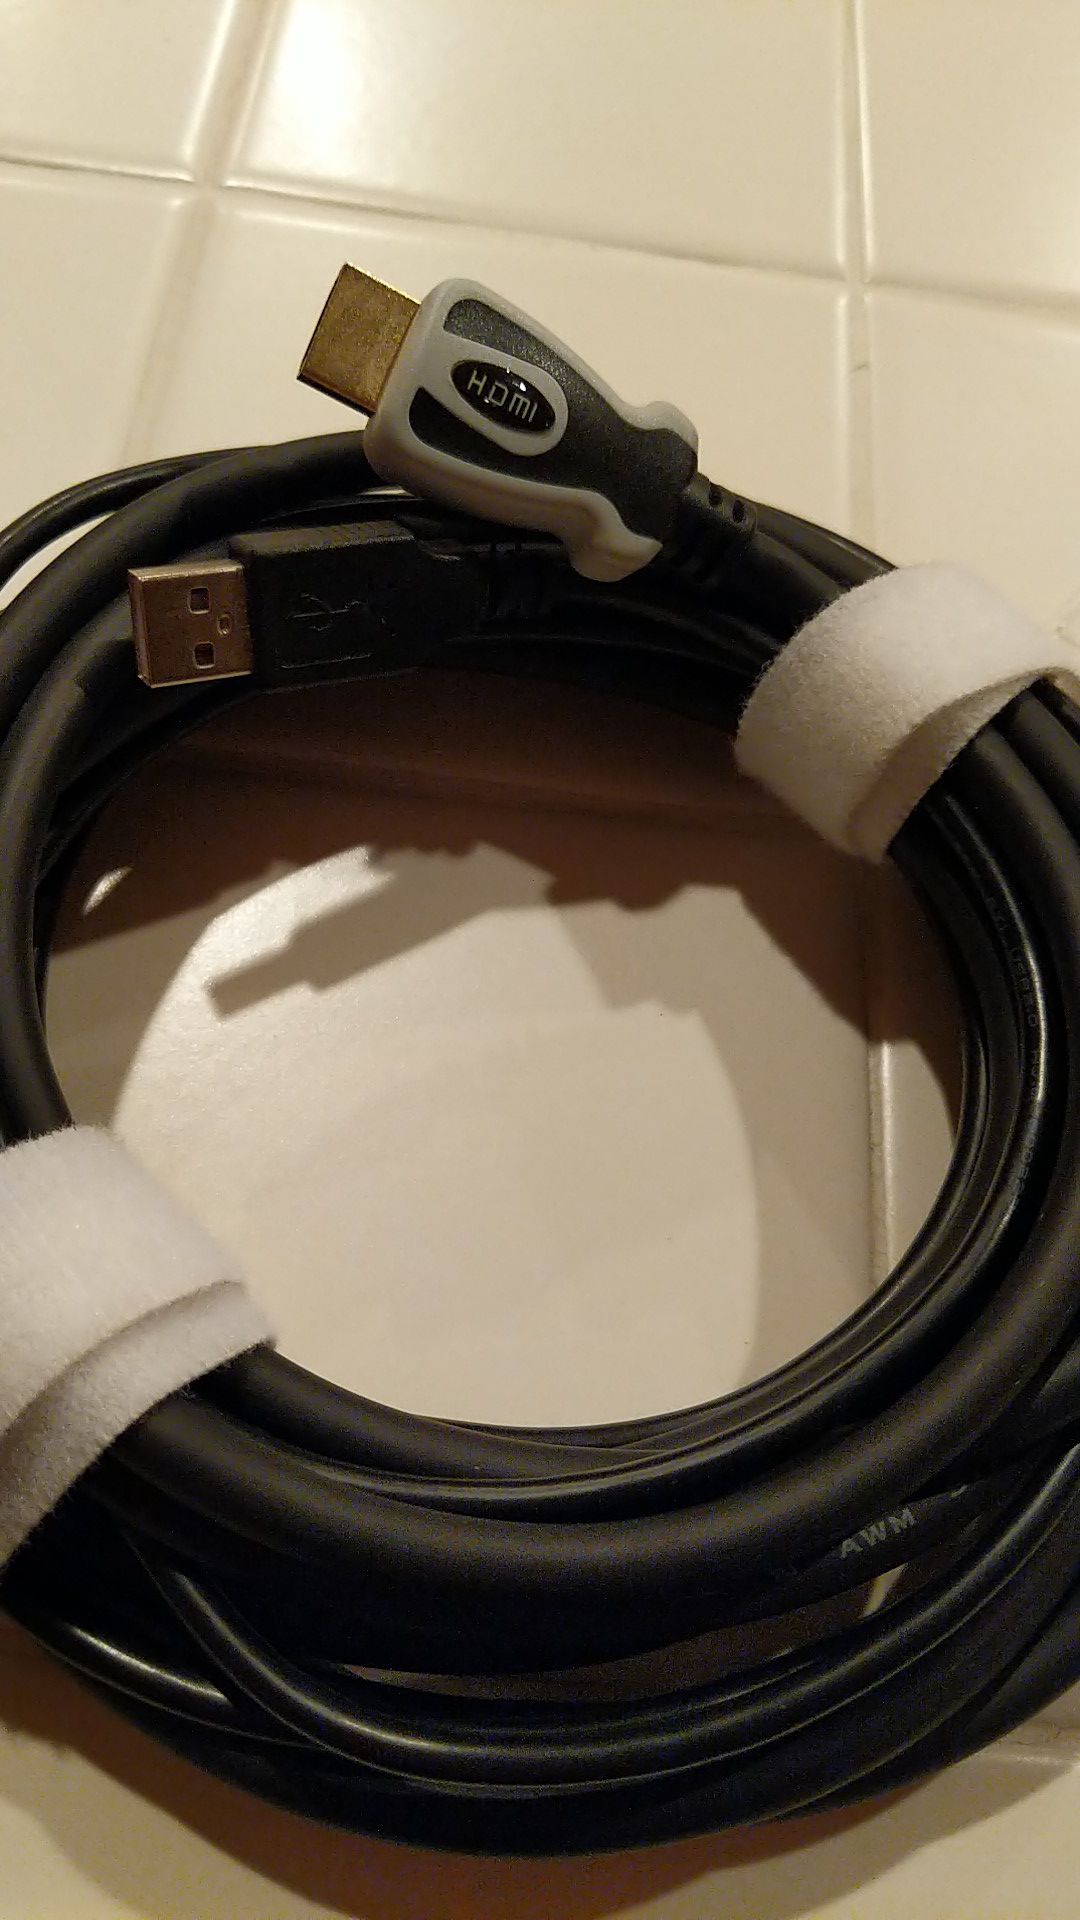 HDMI CABLE and adapter